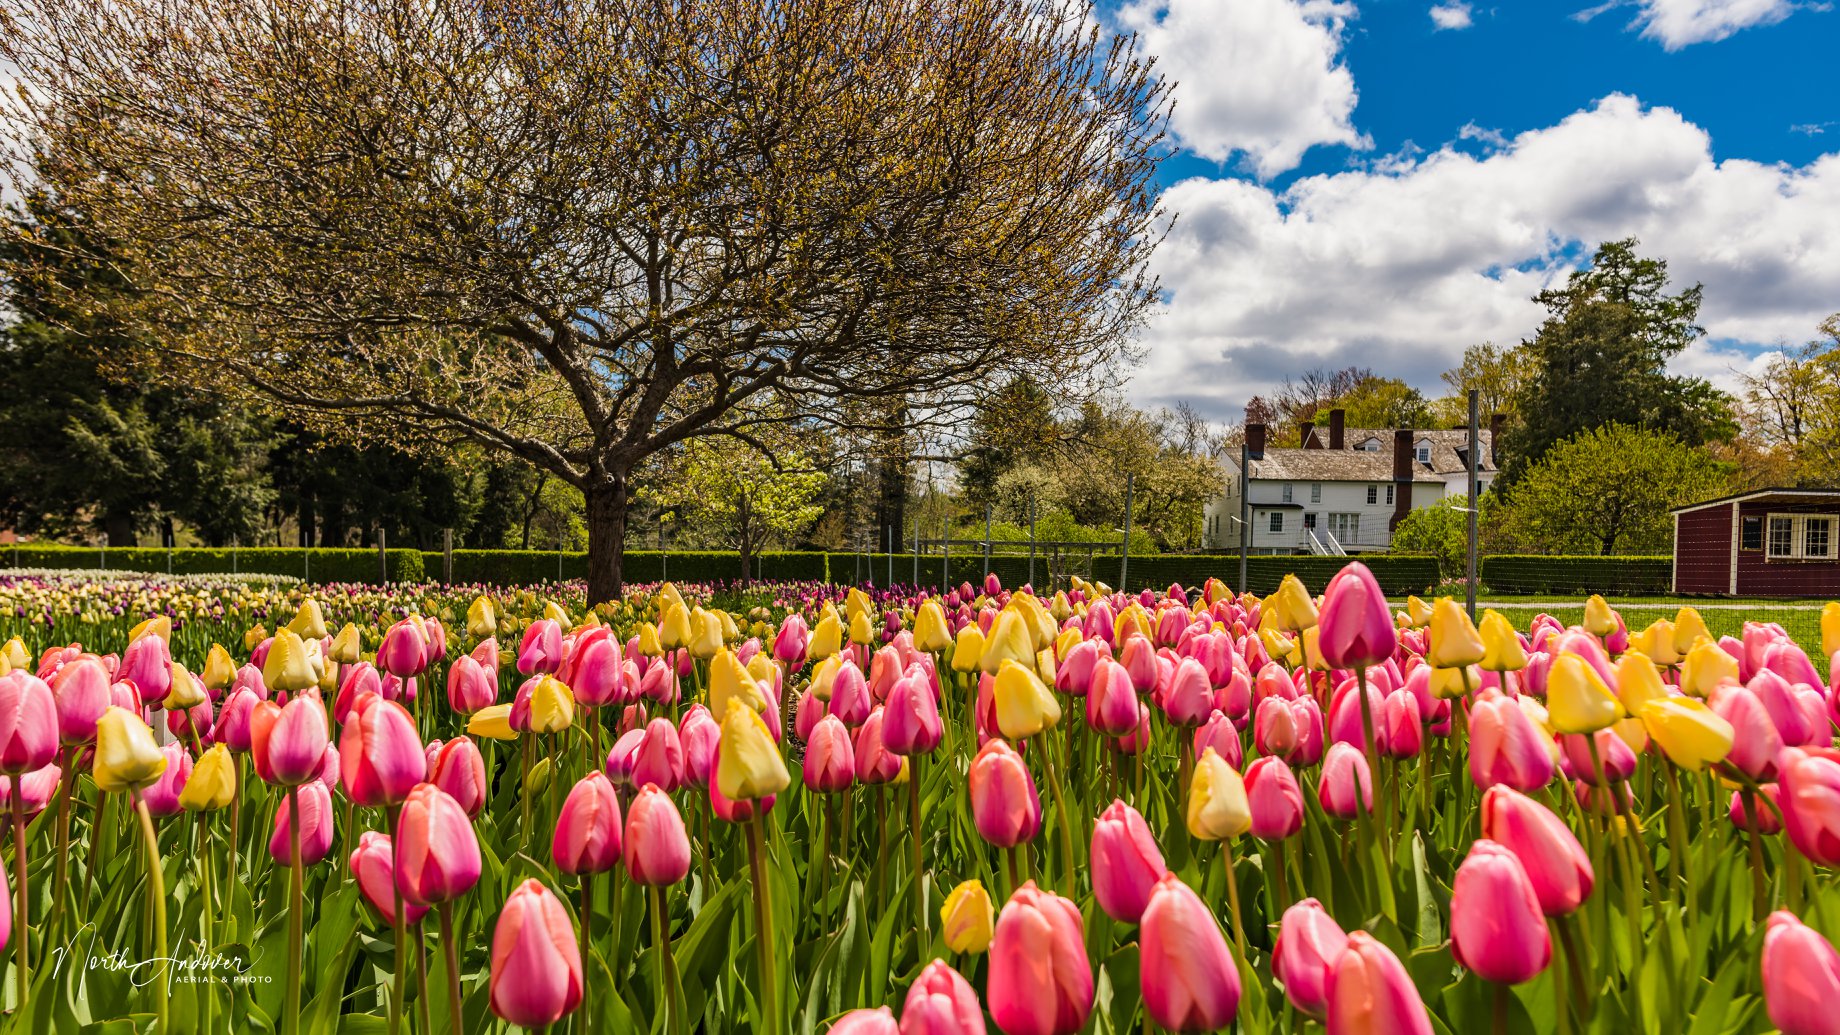 Pink and yellow tulips in the foreground, with the Stevens-Coolidge house in the background